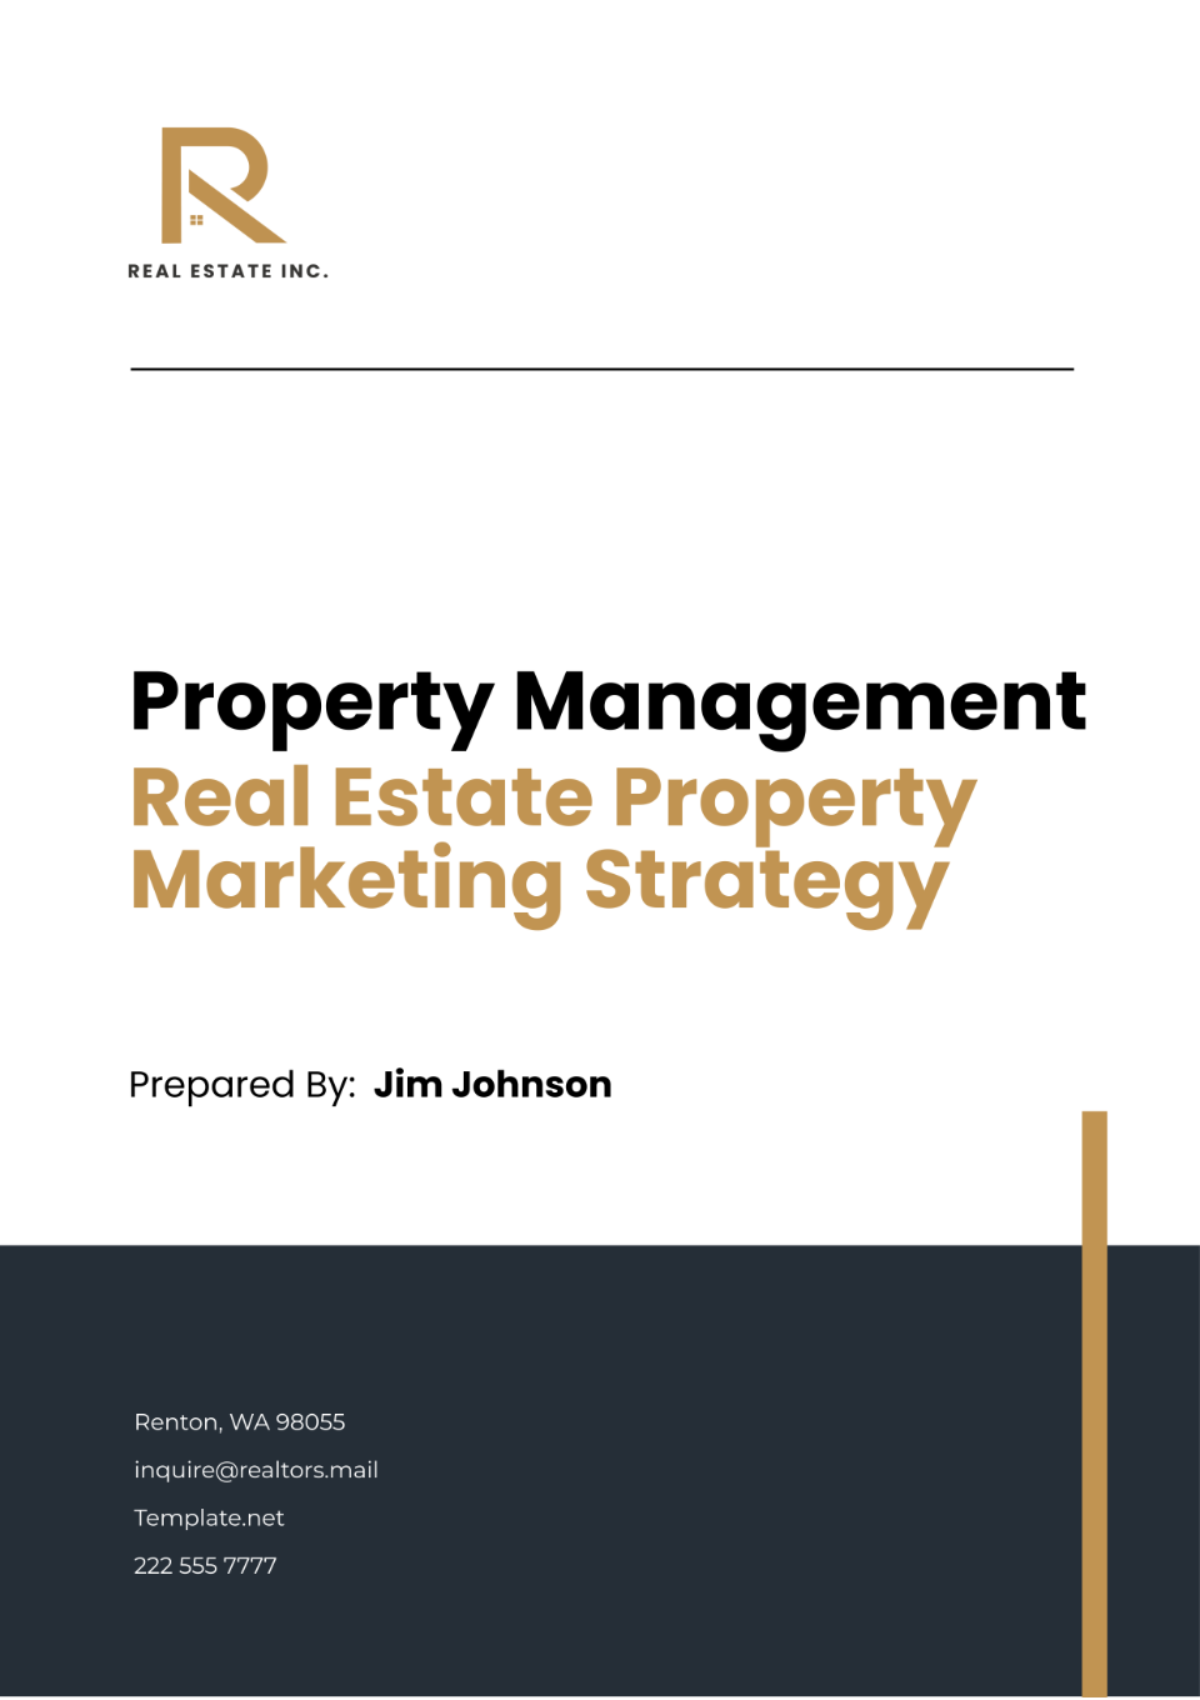 Free Real Estate Property Marketing Strategy Template